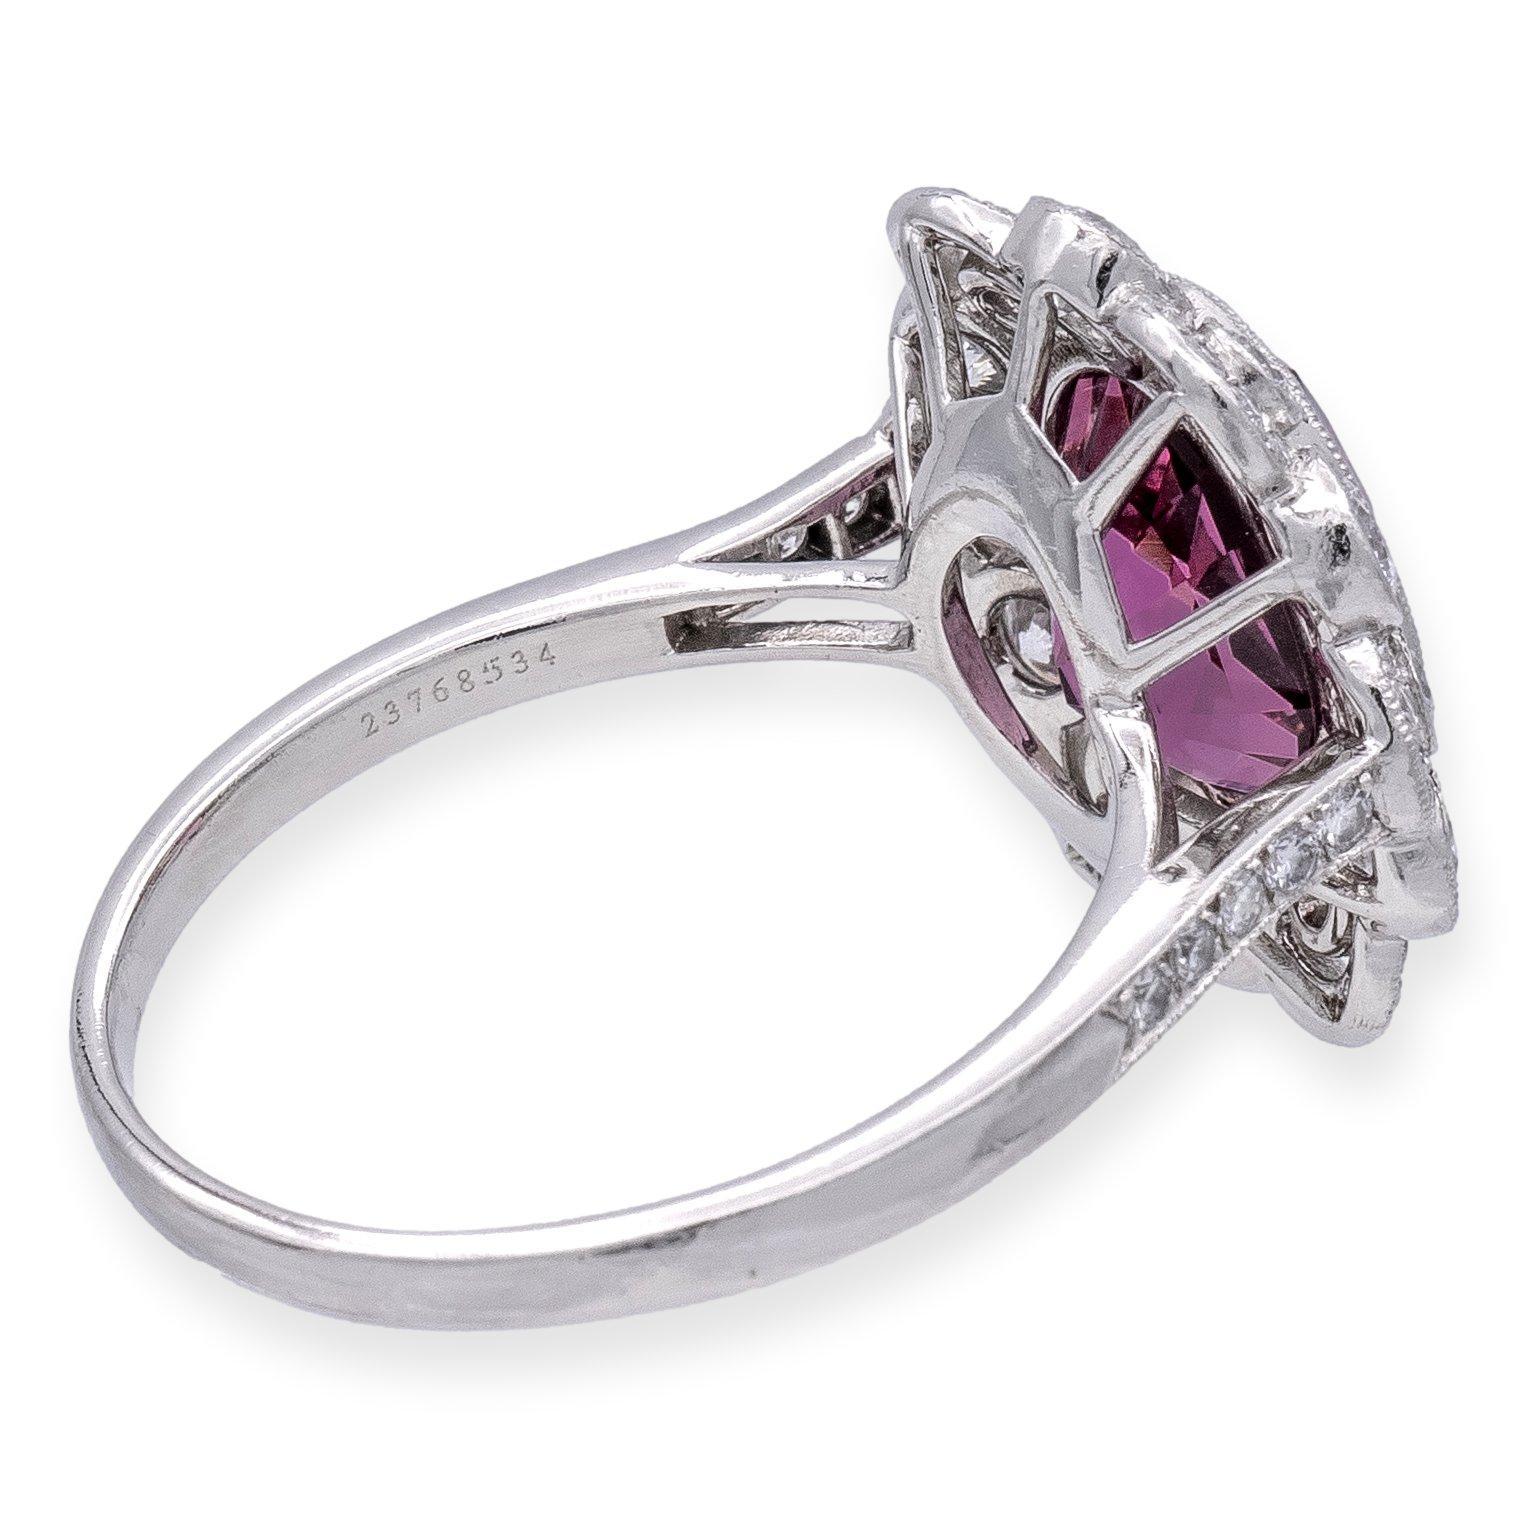 Vintage Tiffany & Co. Platinum Oval 5.20ct Pink Spinel and Diamond Ring In Excellent Condition For Sale In New York, NY